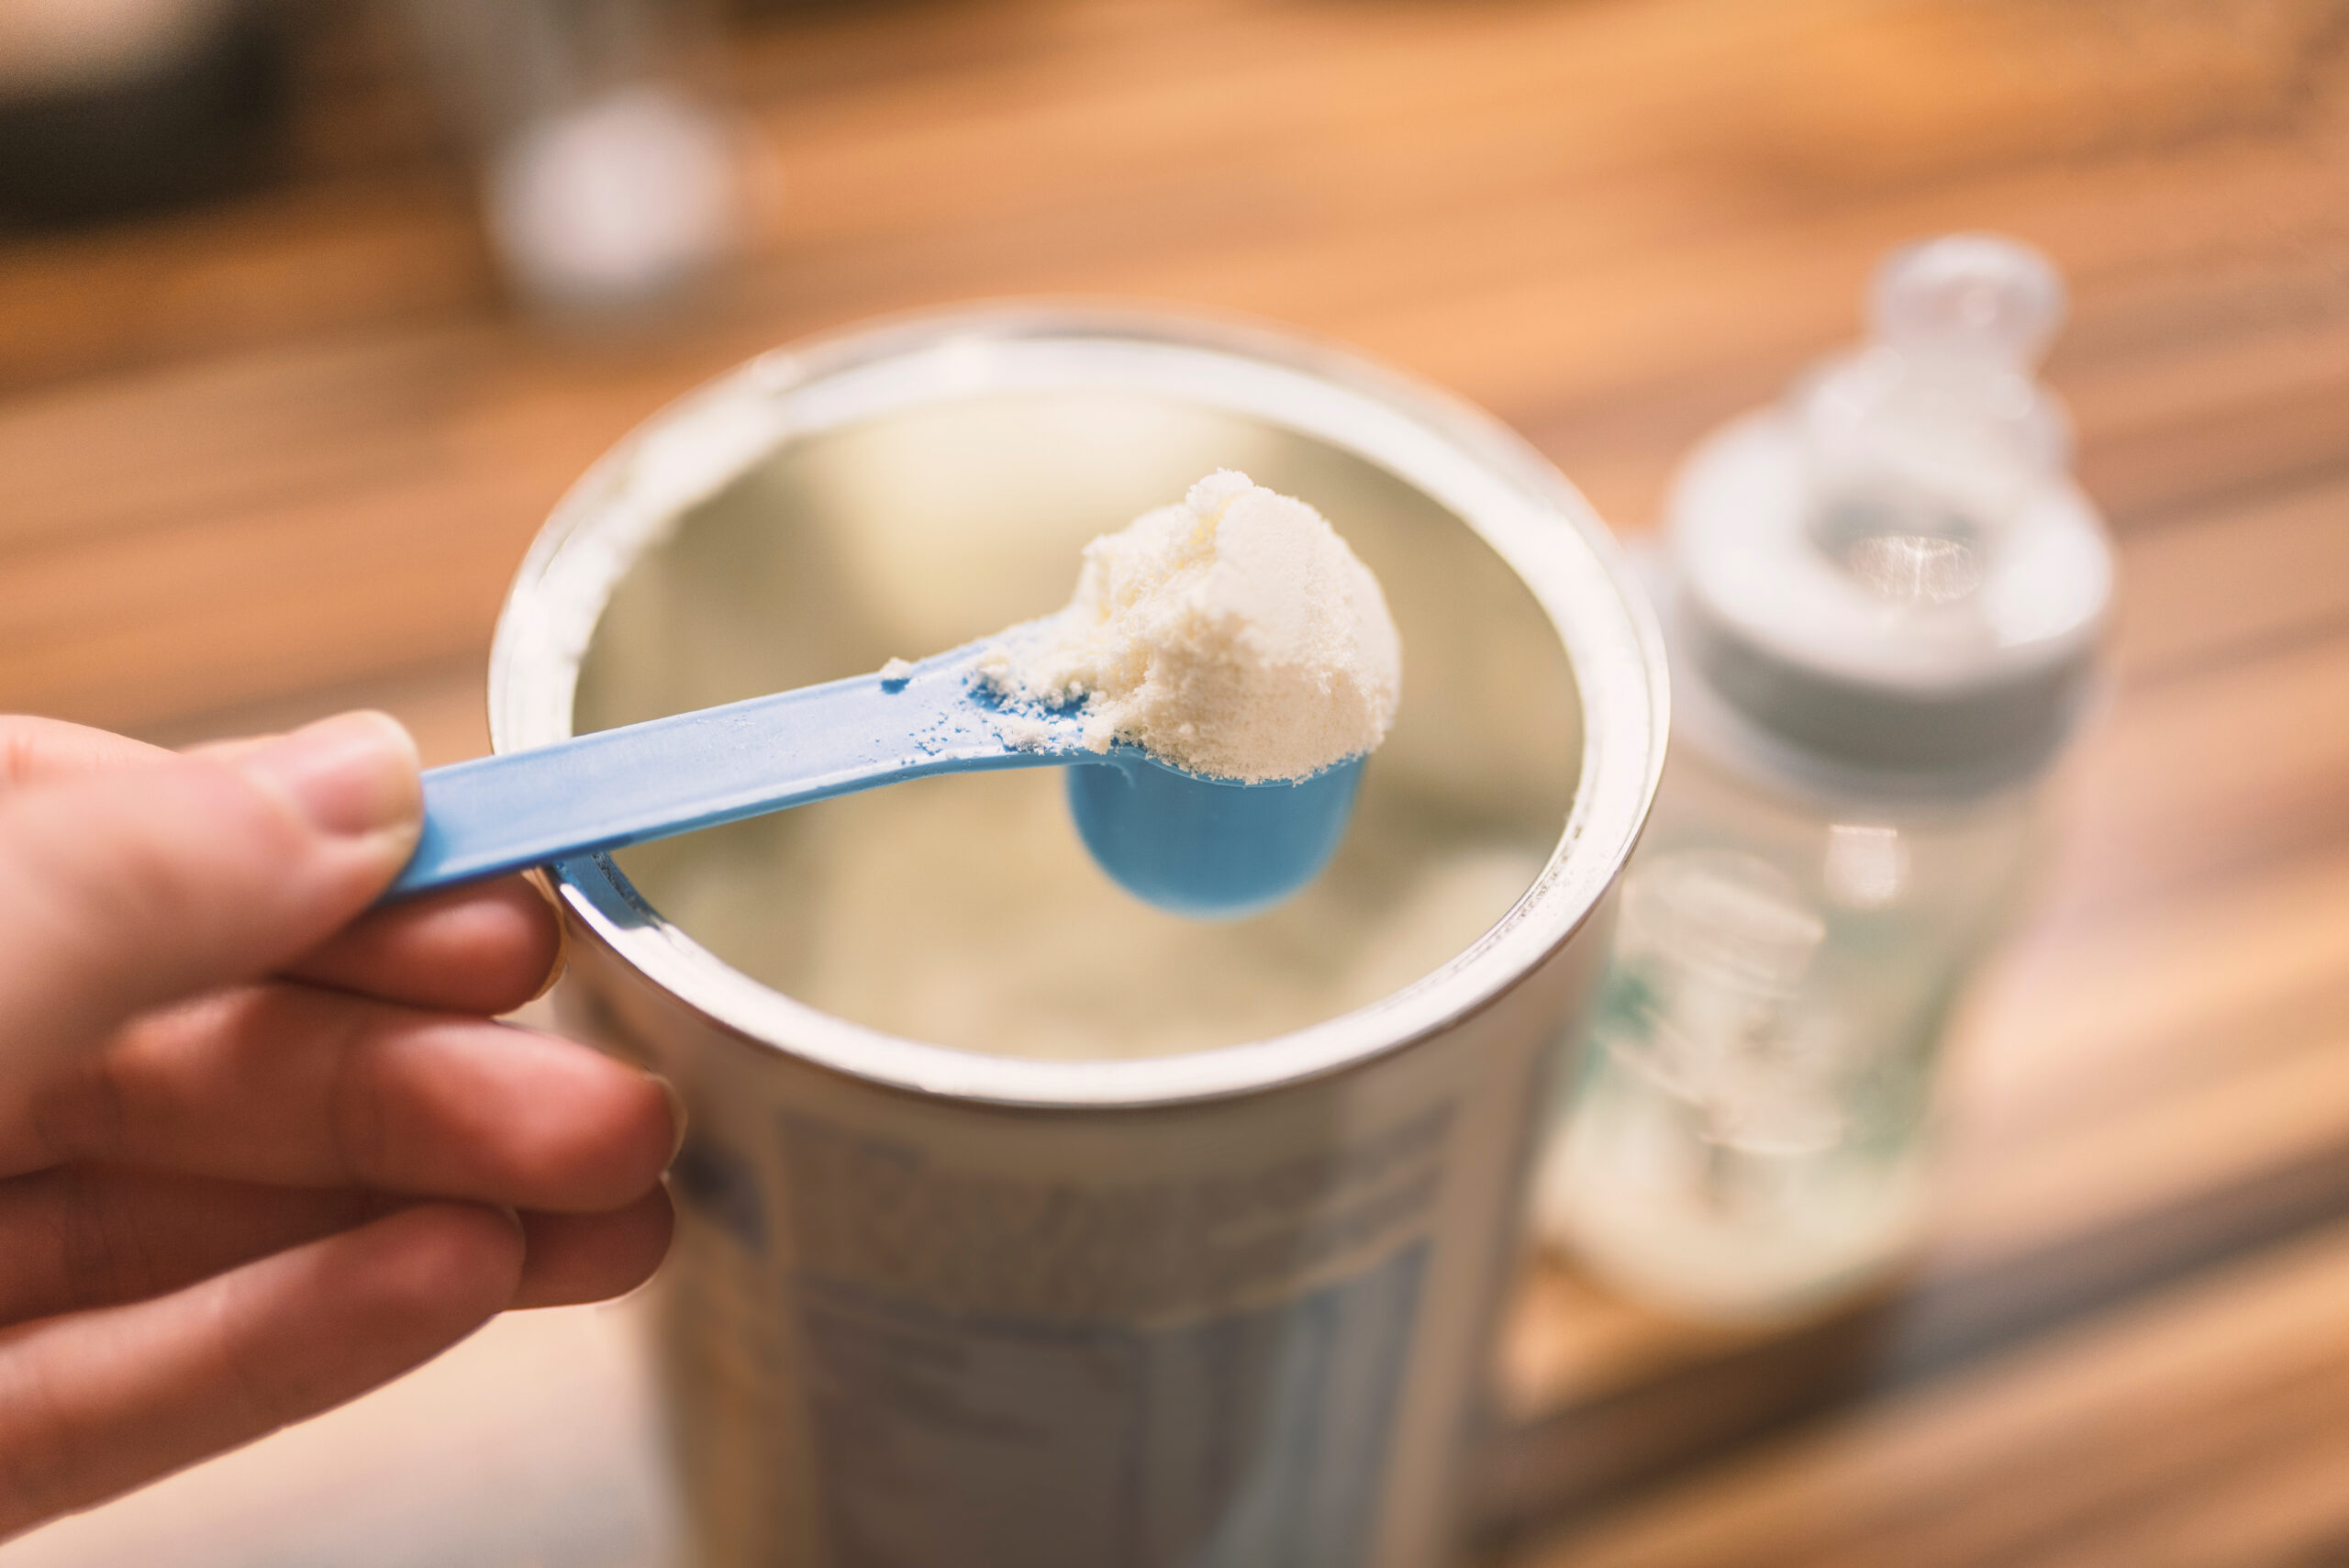 A photo of an open infant formula can with a hand holding a powdered formula scoop on top of the can.